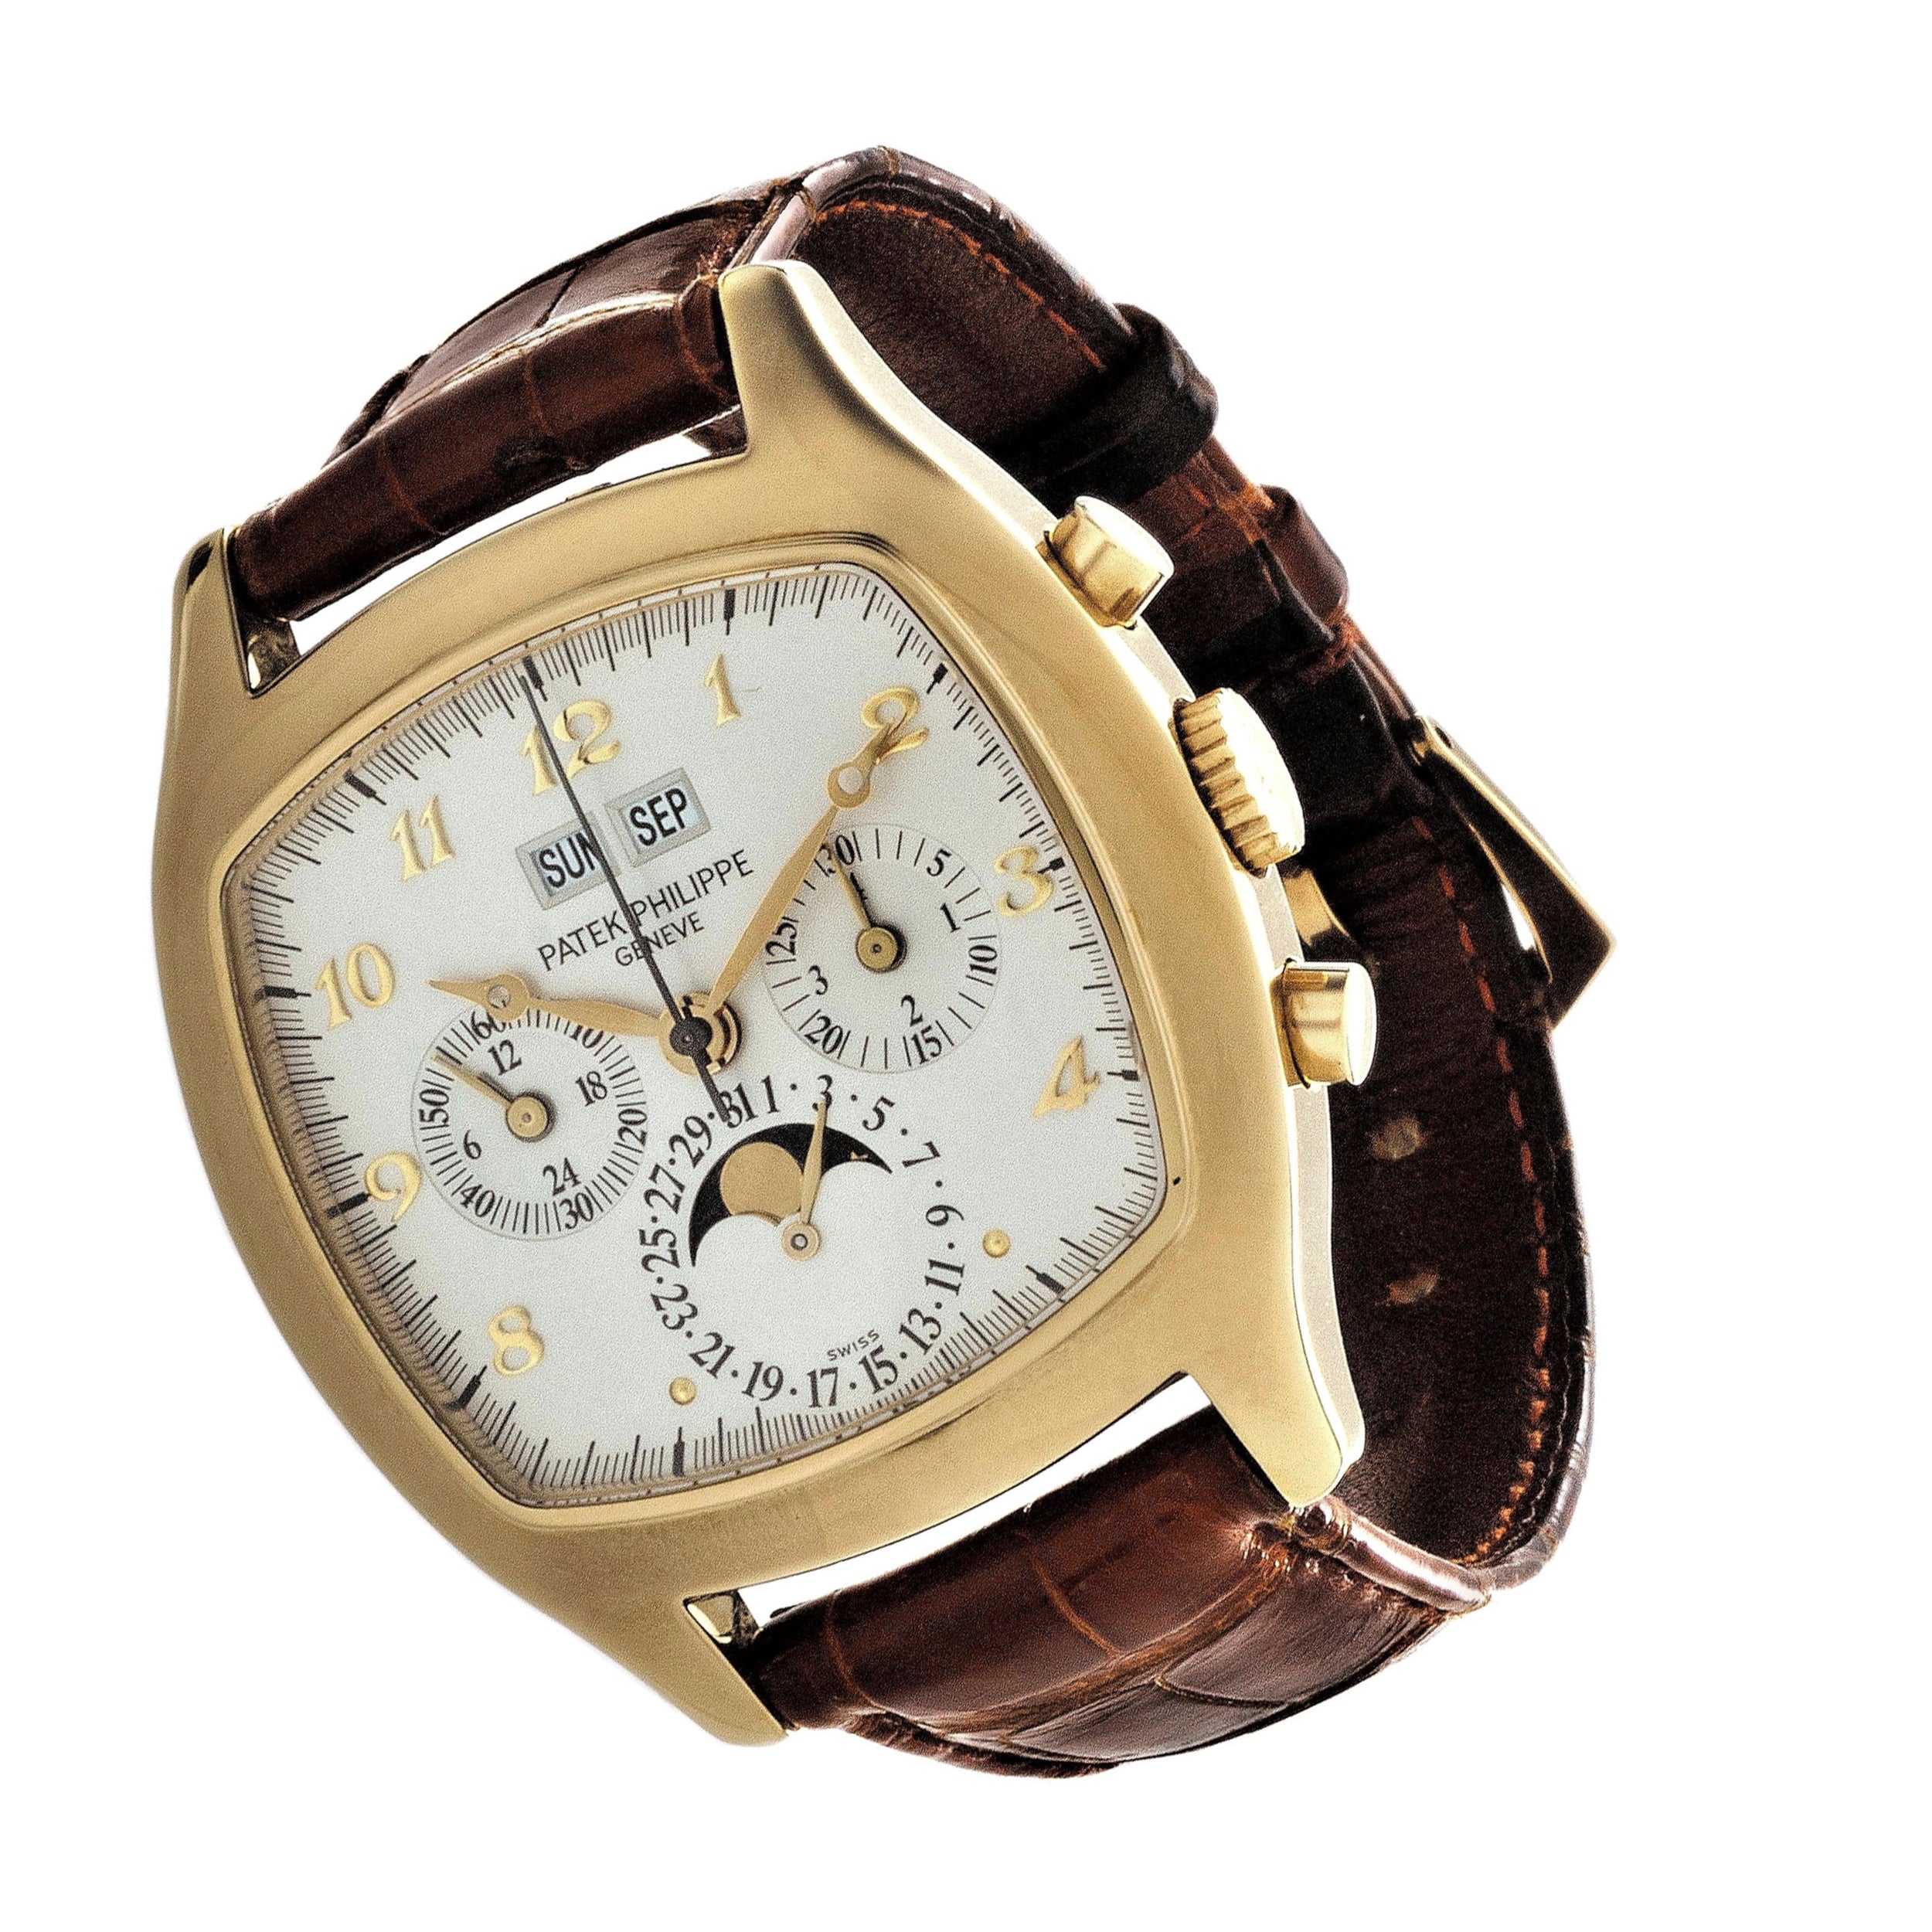 Patek Philippe Geneve Watch Stock Photo, Picture and Royalty Free Image.  Image 20851650.